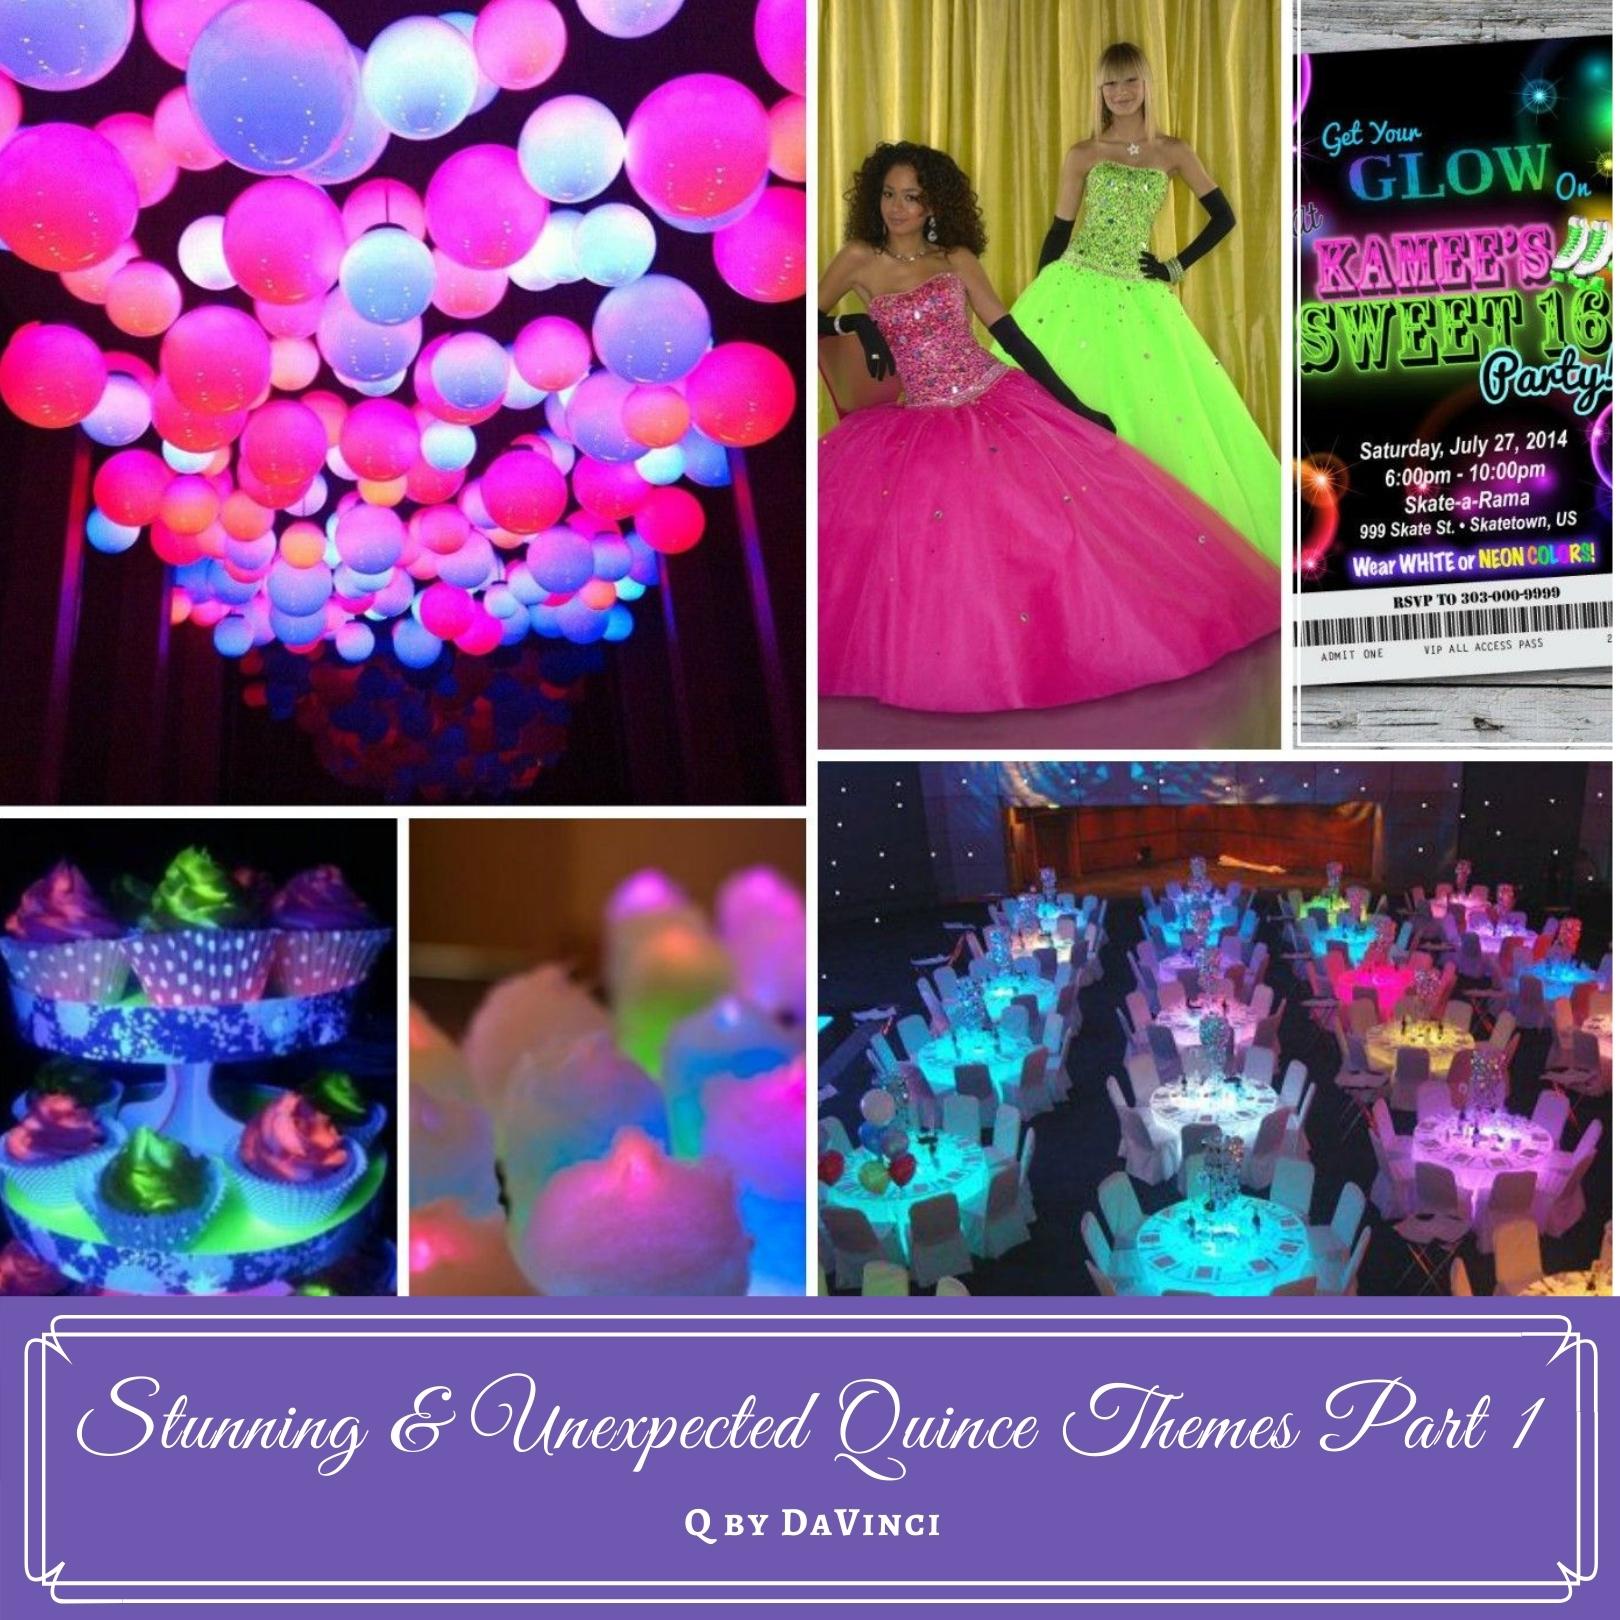 Stunning & Unexpected Quince Themes Part 1